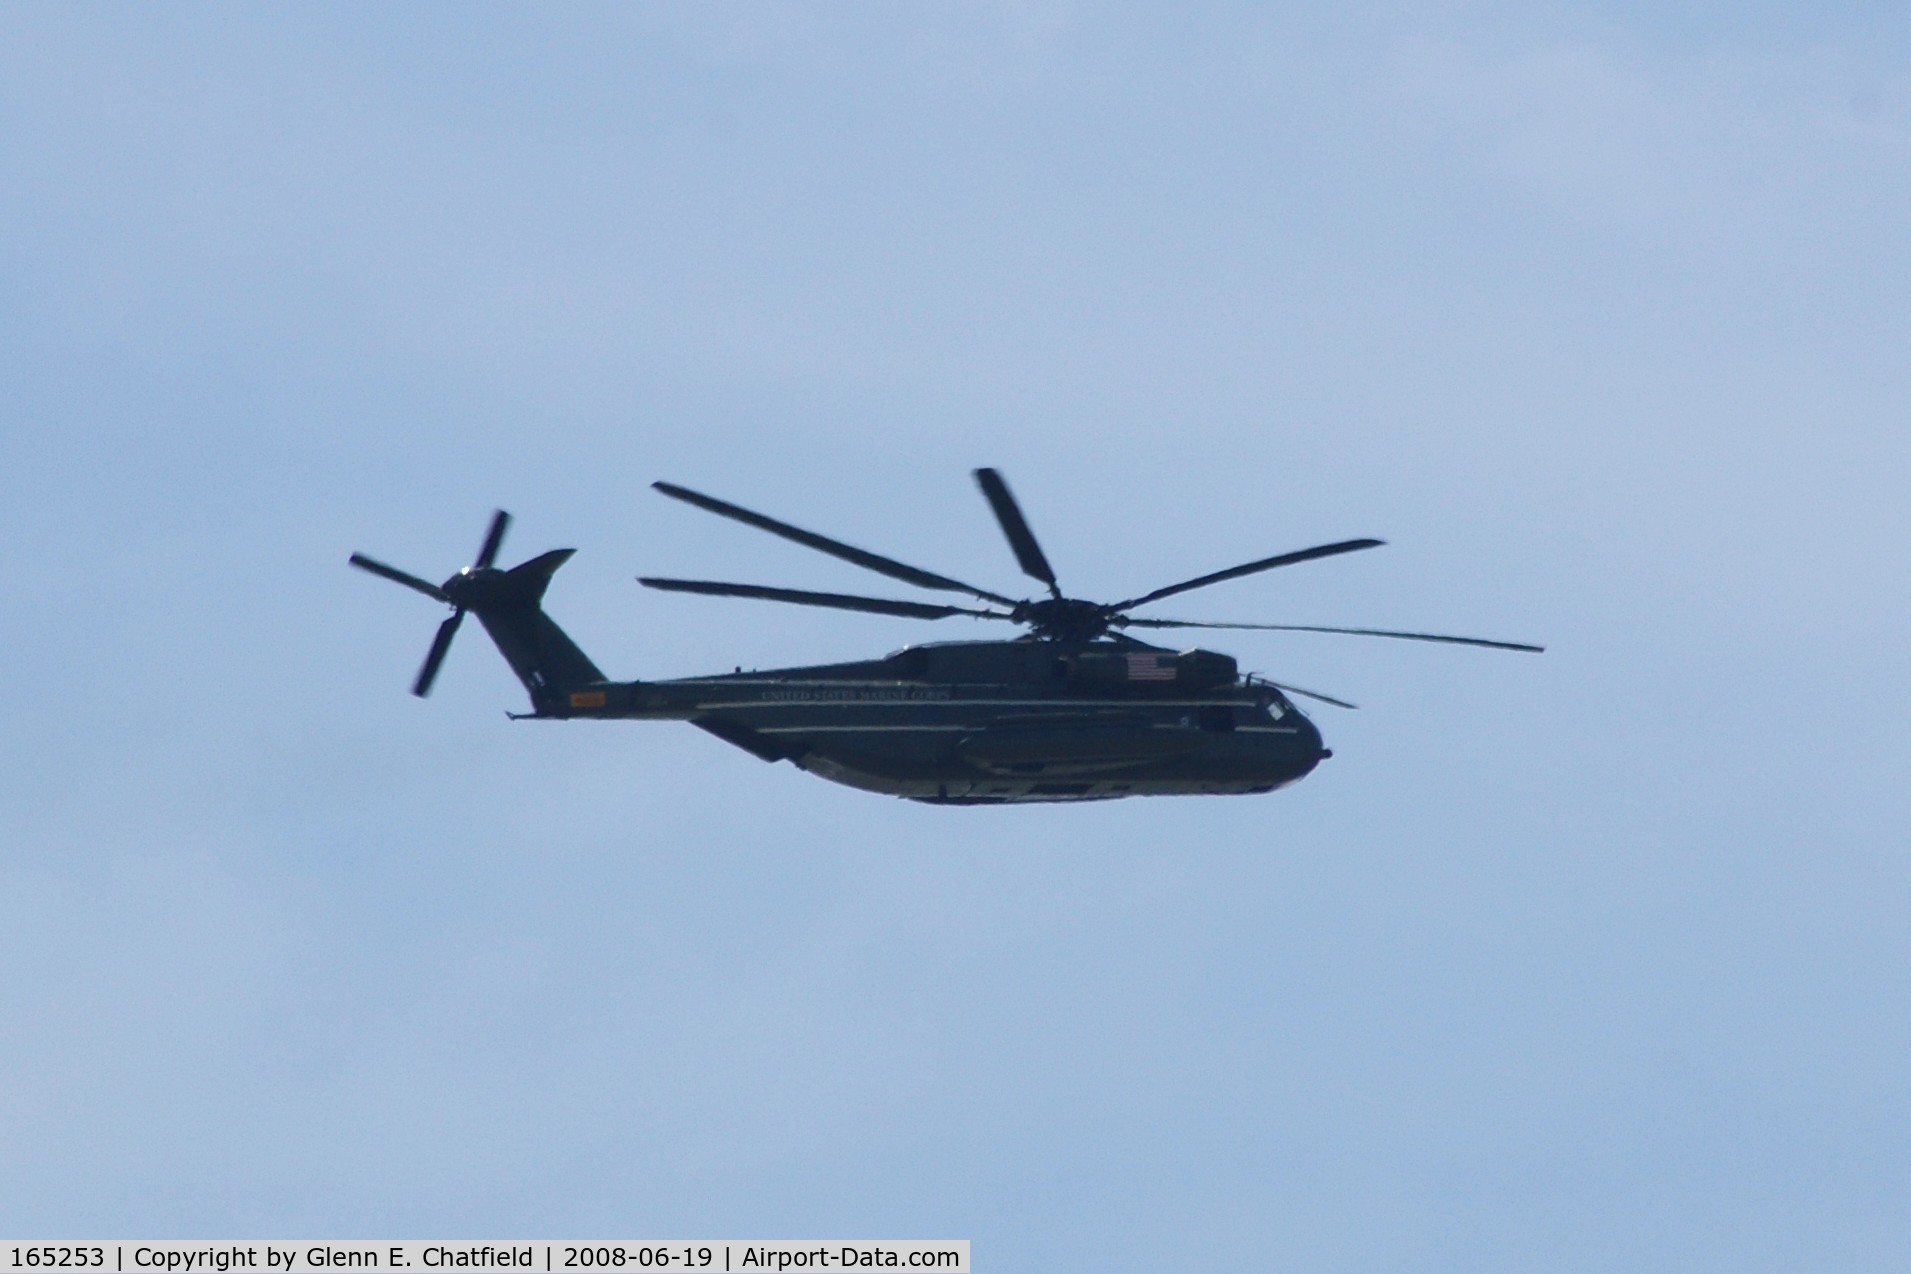 165253, Sikorsky CH-53E Super Stallion C/N 65-647, Flying over North Liberty, IA as part of Presidential fleet.  The two VH-3Ds were much farther away.